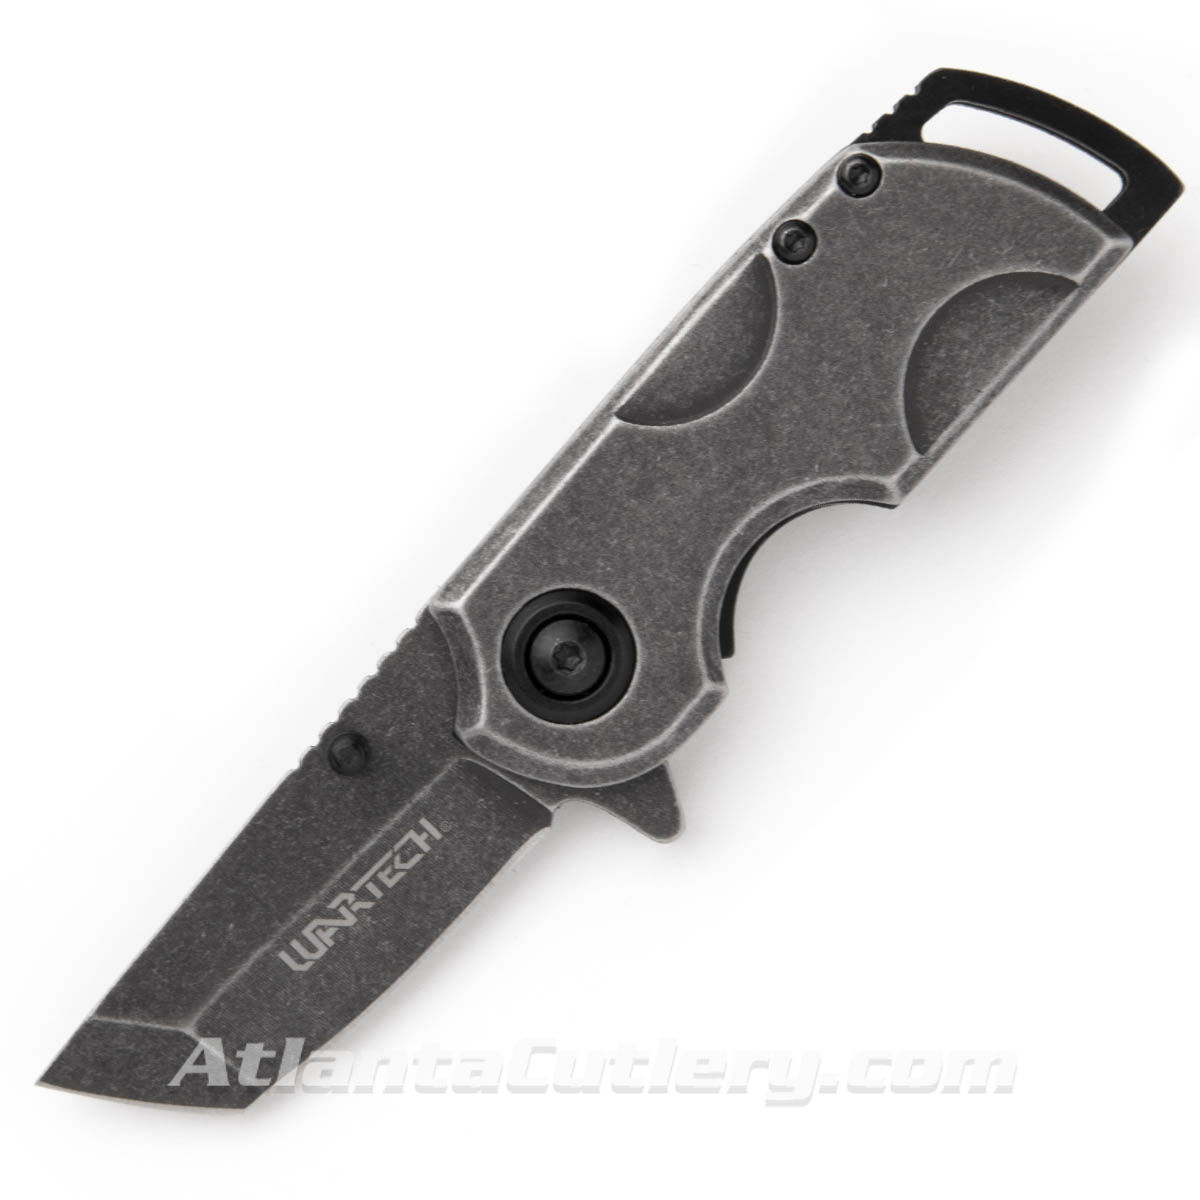 Wartech Stubby Liner Lock pocket knife with tanto blade and ambidextrous thumb studs is entirely stonewashed